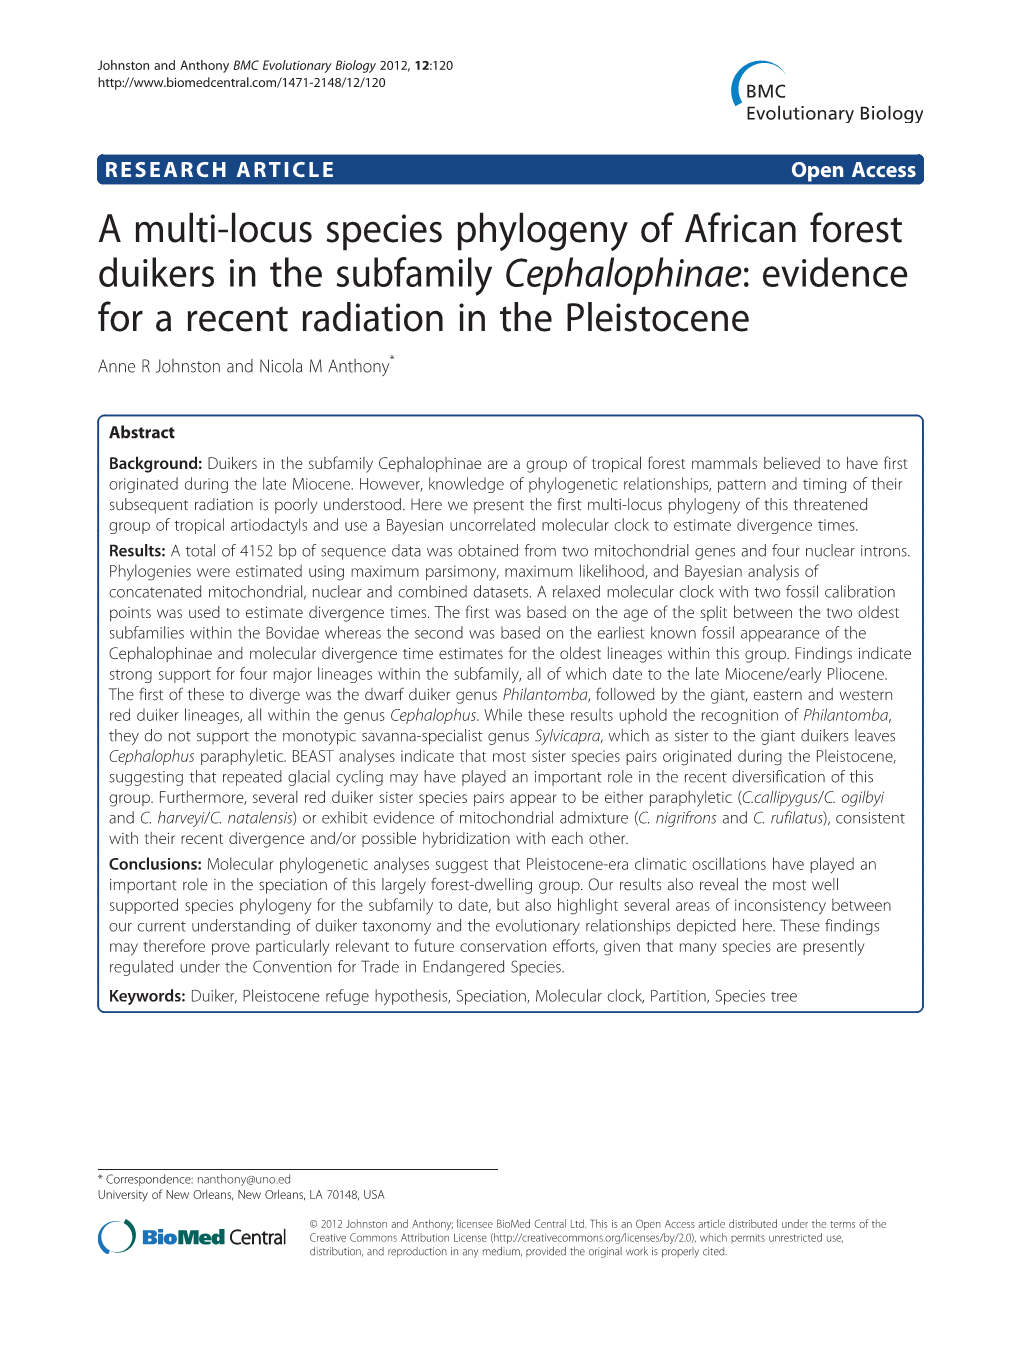 A Multi-Locus Species Phylogeny of African Forest Duikers in The